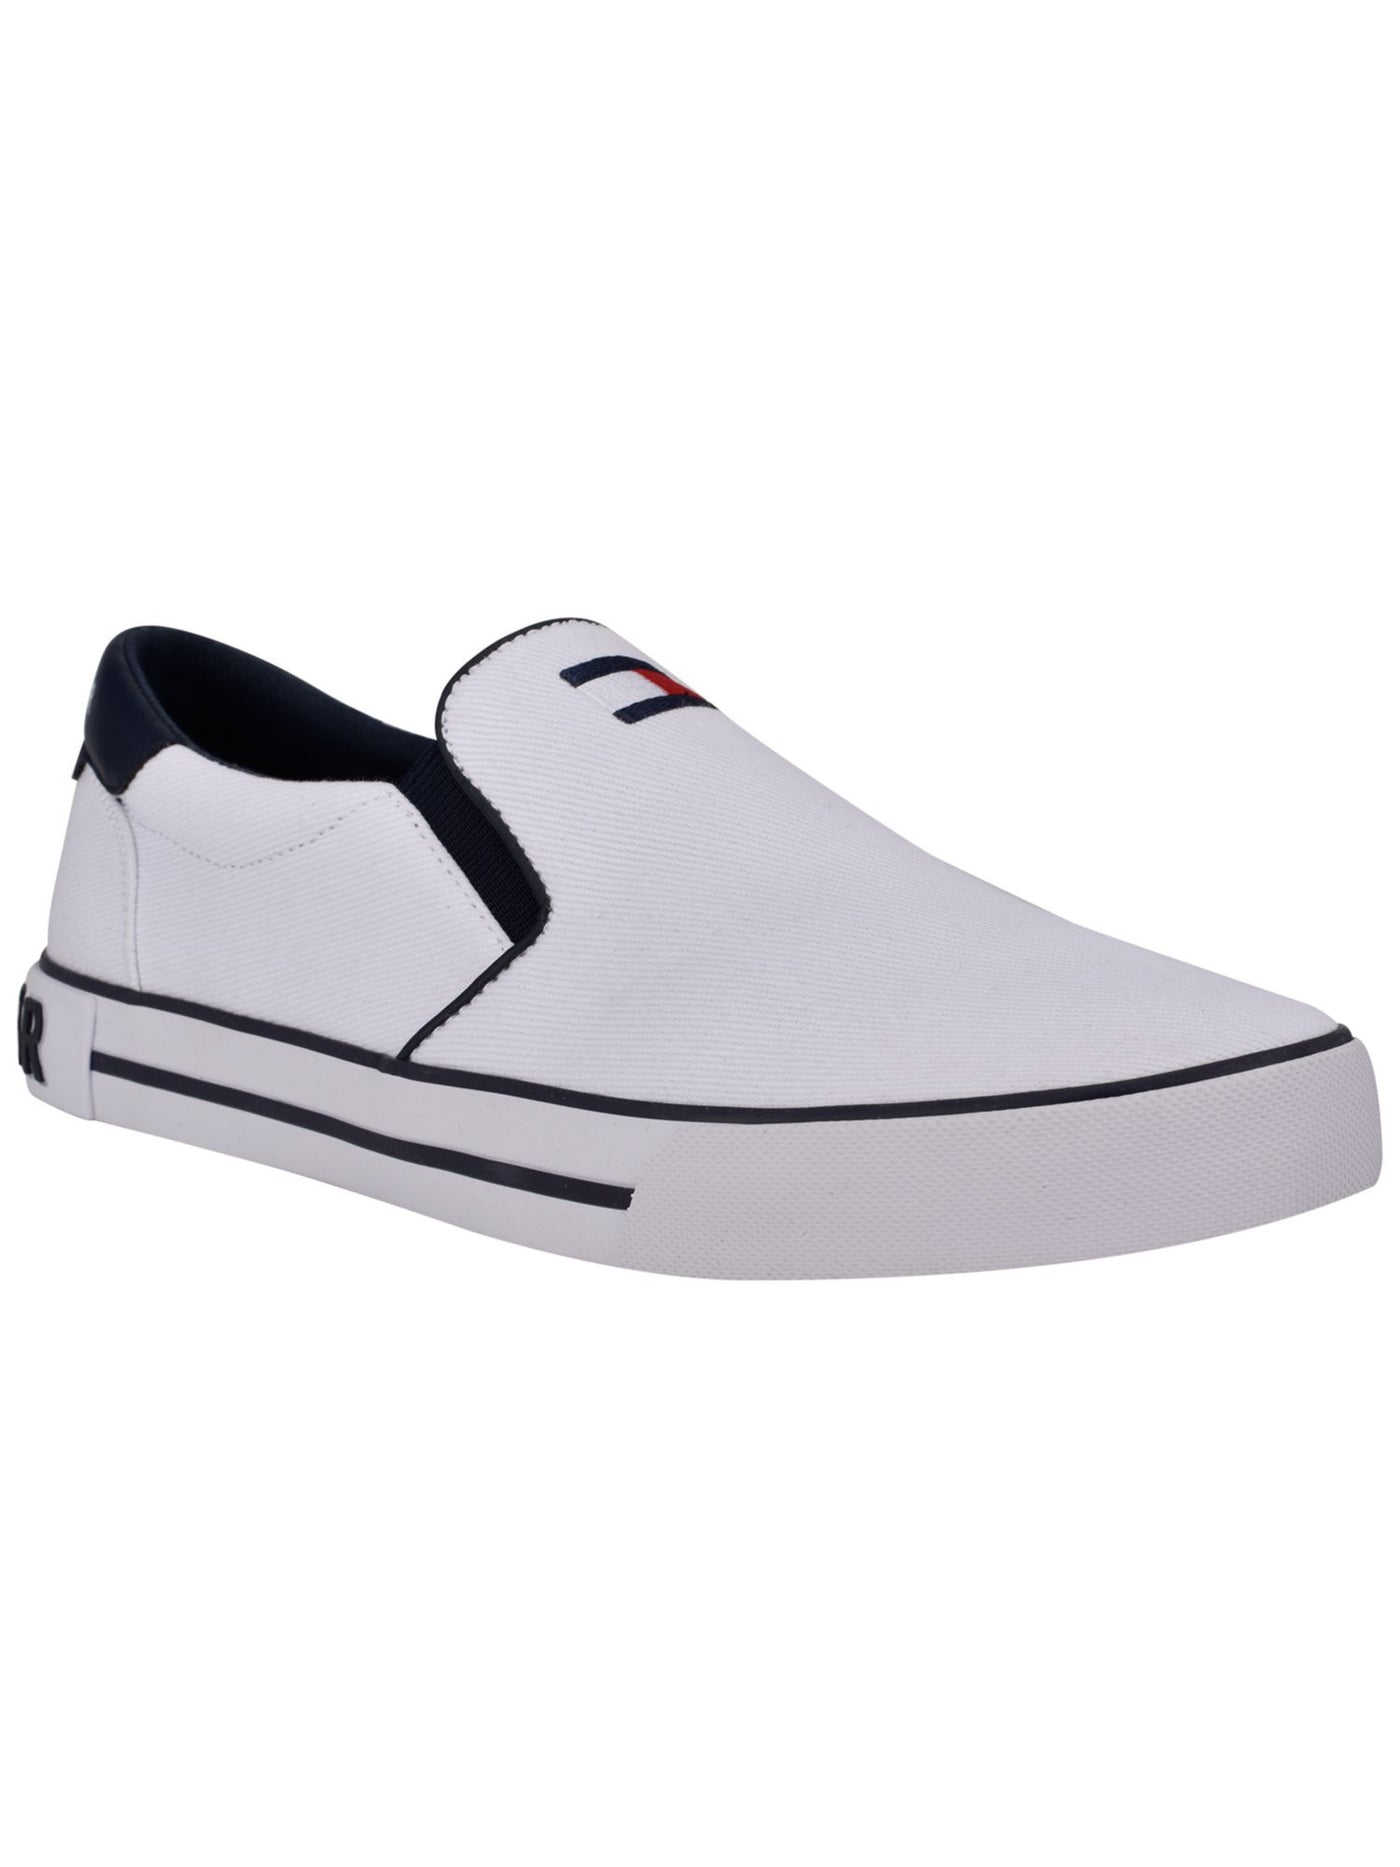 TOMMY HILFIGER Womens White Comfort Roaklyn Round Toe Slip On Sneakers Shoes 10